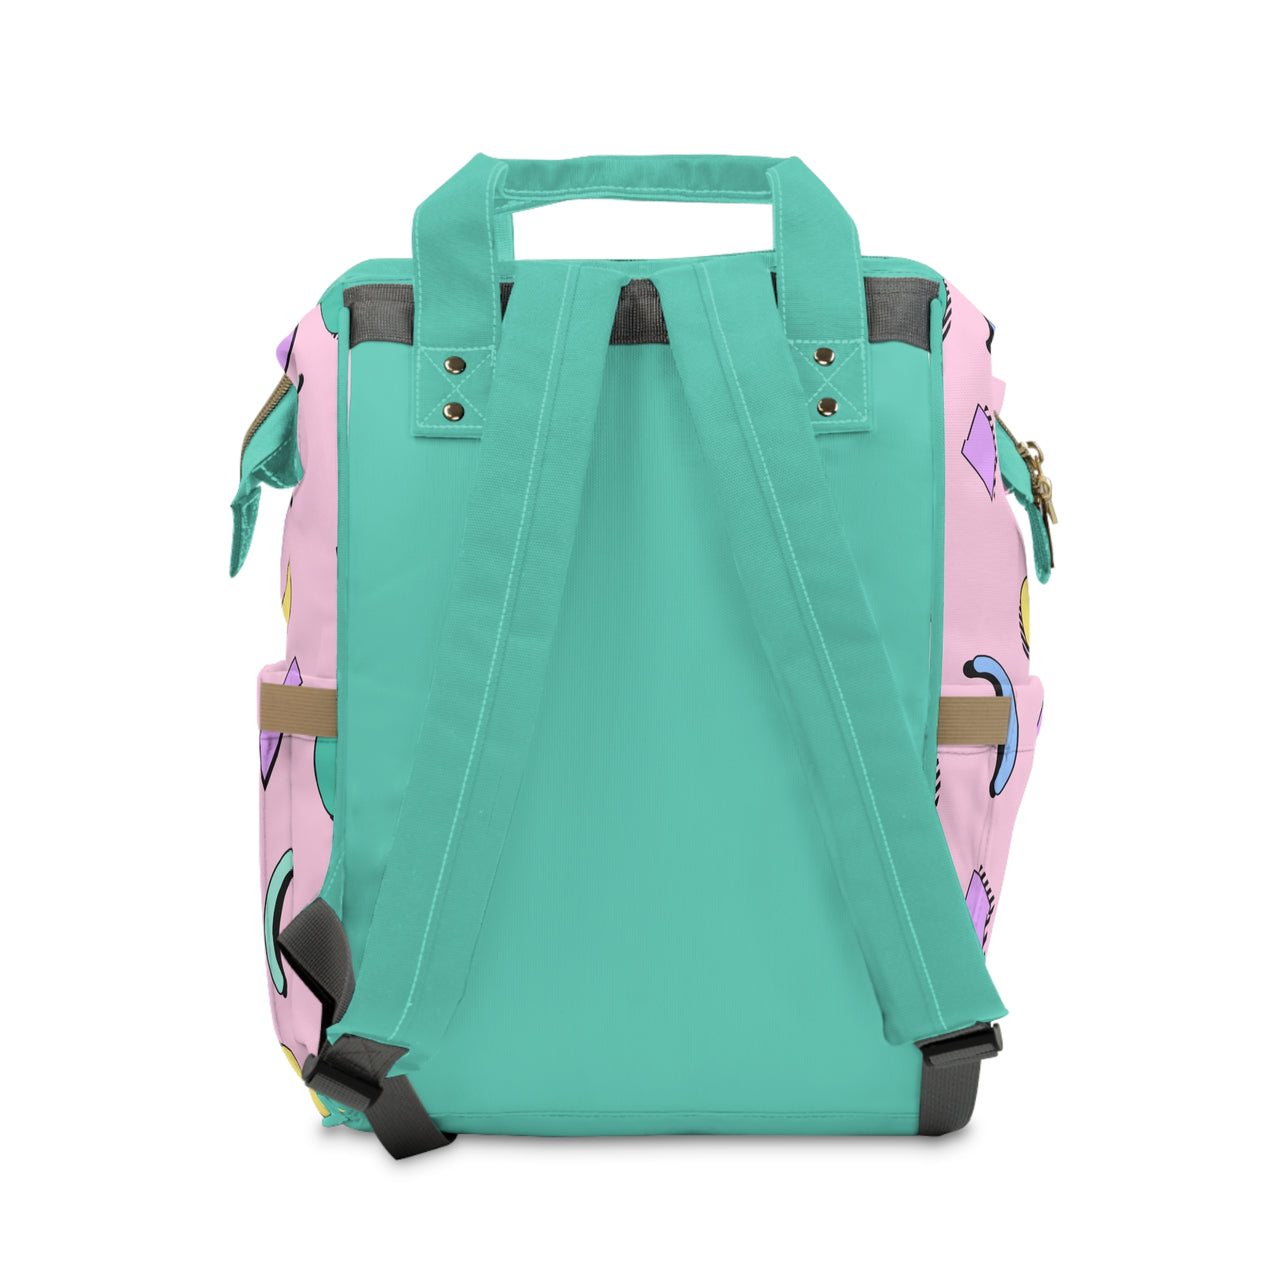 Personalized Pink 90s Inspired Shapes Print Pattern Multifunctional Diaper Backpack, Newborn Gift, Baby Shower Gift, Retro Backpack